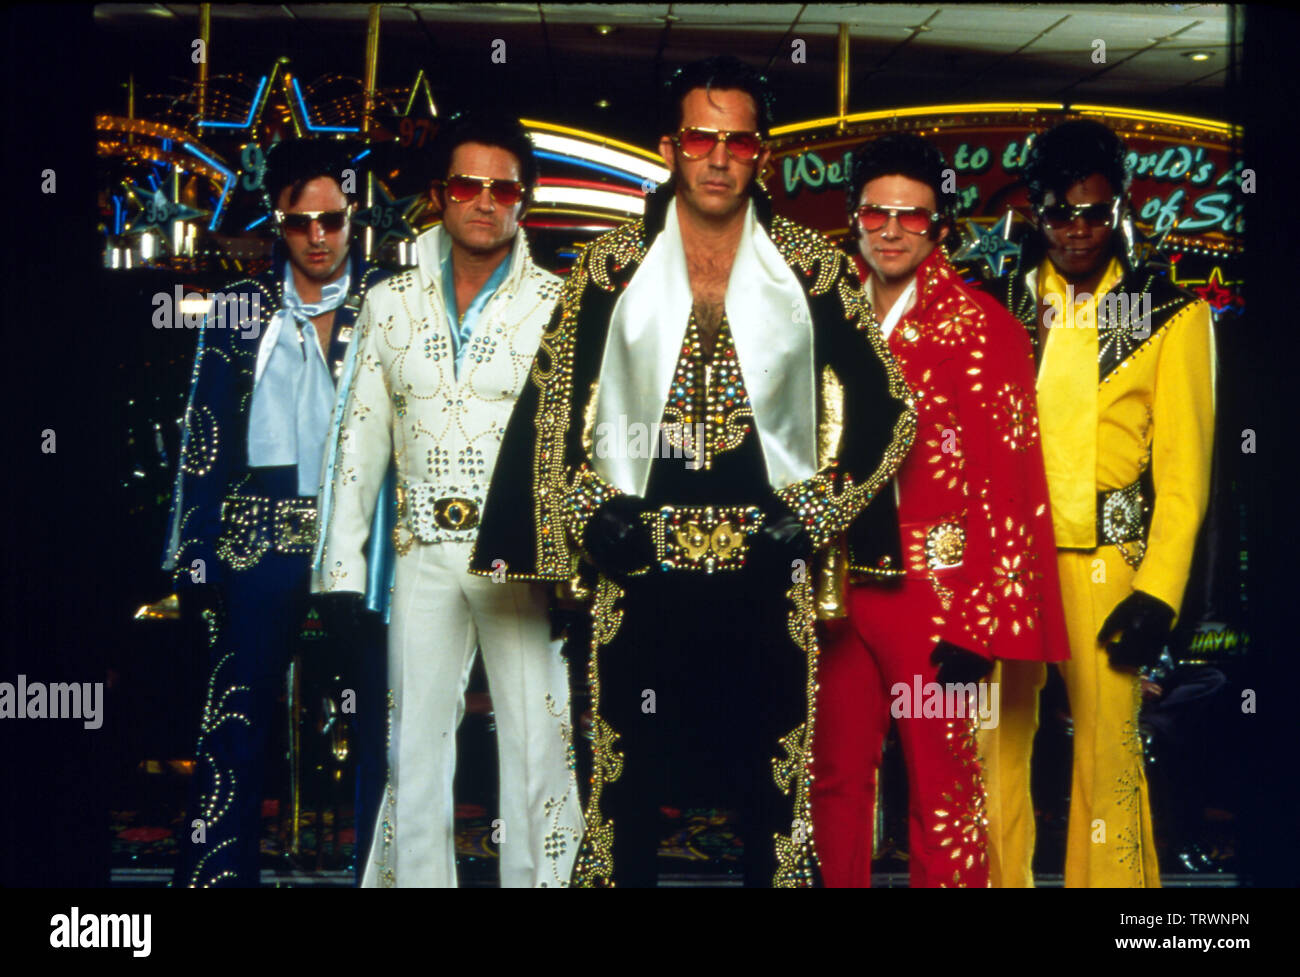 KURT RUSSELL , DAVID ARQUETTE , KEVIN COSTNER , CHRISTIAN SLATER and BOKEEM WOODBINE in 3000 MILES TO GRACELAND (2001). Copyright: Editorial use only. No merchandising or book covers. This is a publicly distributed handout. Access rights only, no license of copyright provided. Only to be reproduced in conjunction with promotion of this film. Credit: 3000MILES PROD/LIGHTONE ENT/FRANCHISE/MORGAN CREEK/WARNER / Album Stock Photo